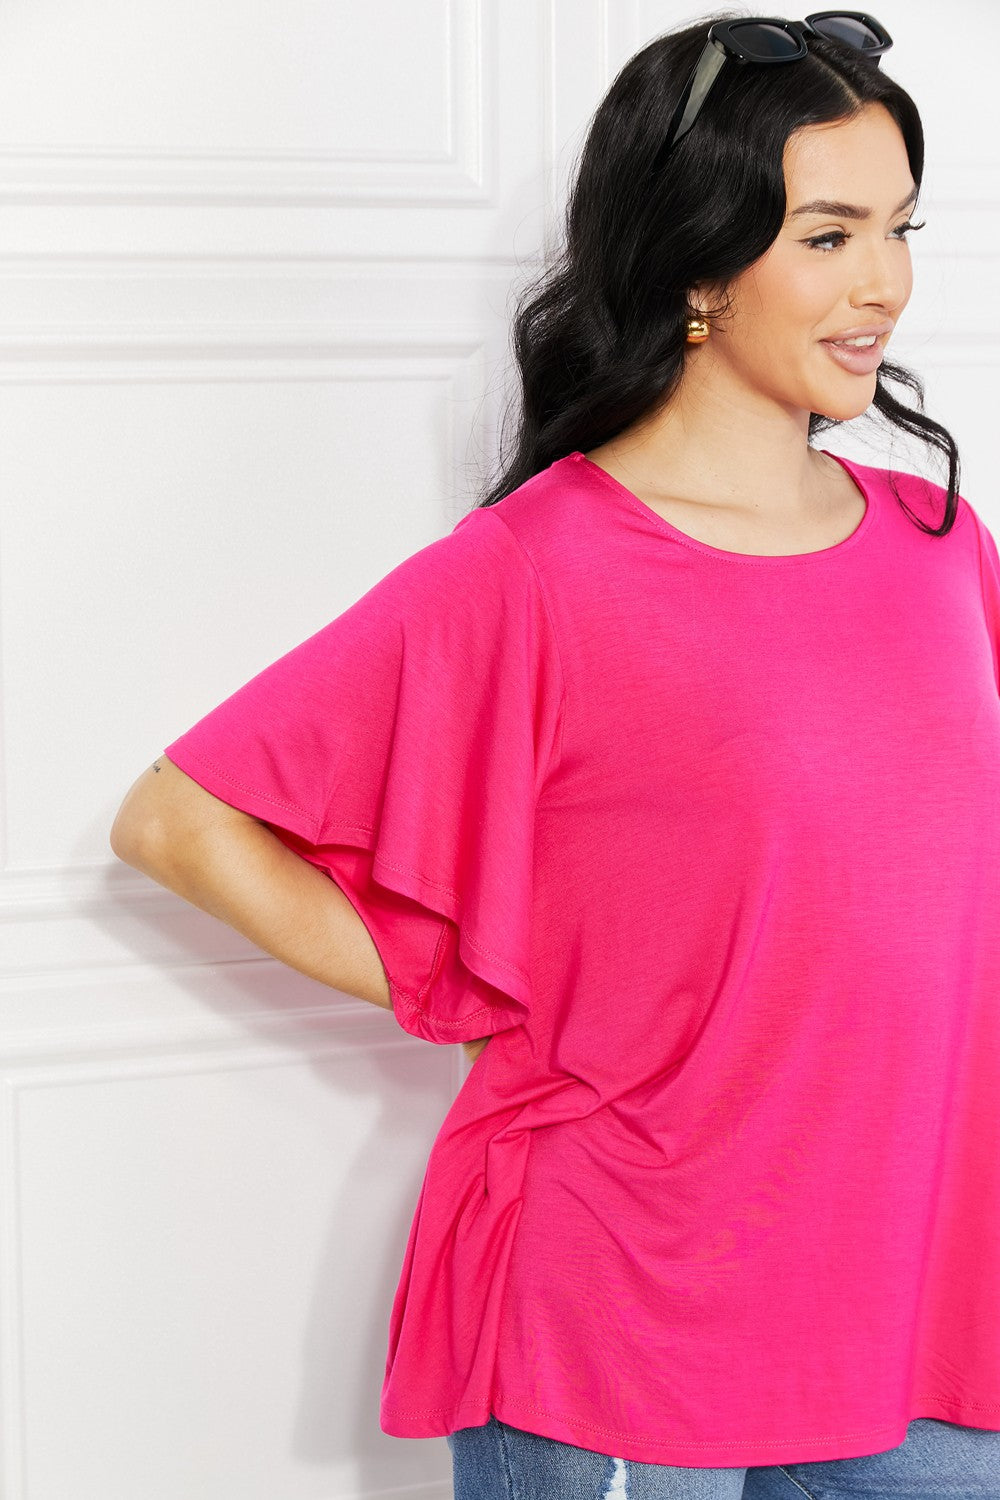 Yelete More Than Words Flutter Sleeve Top - Online Only